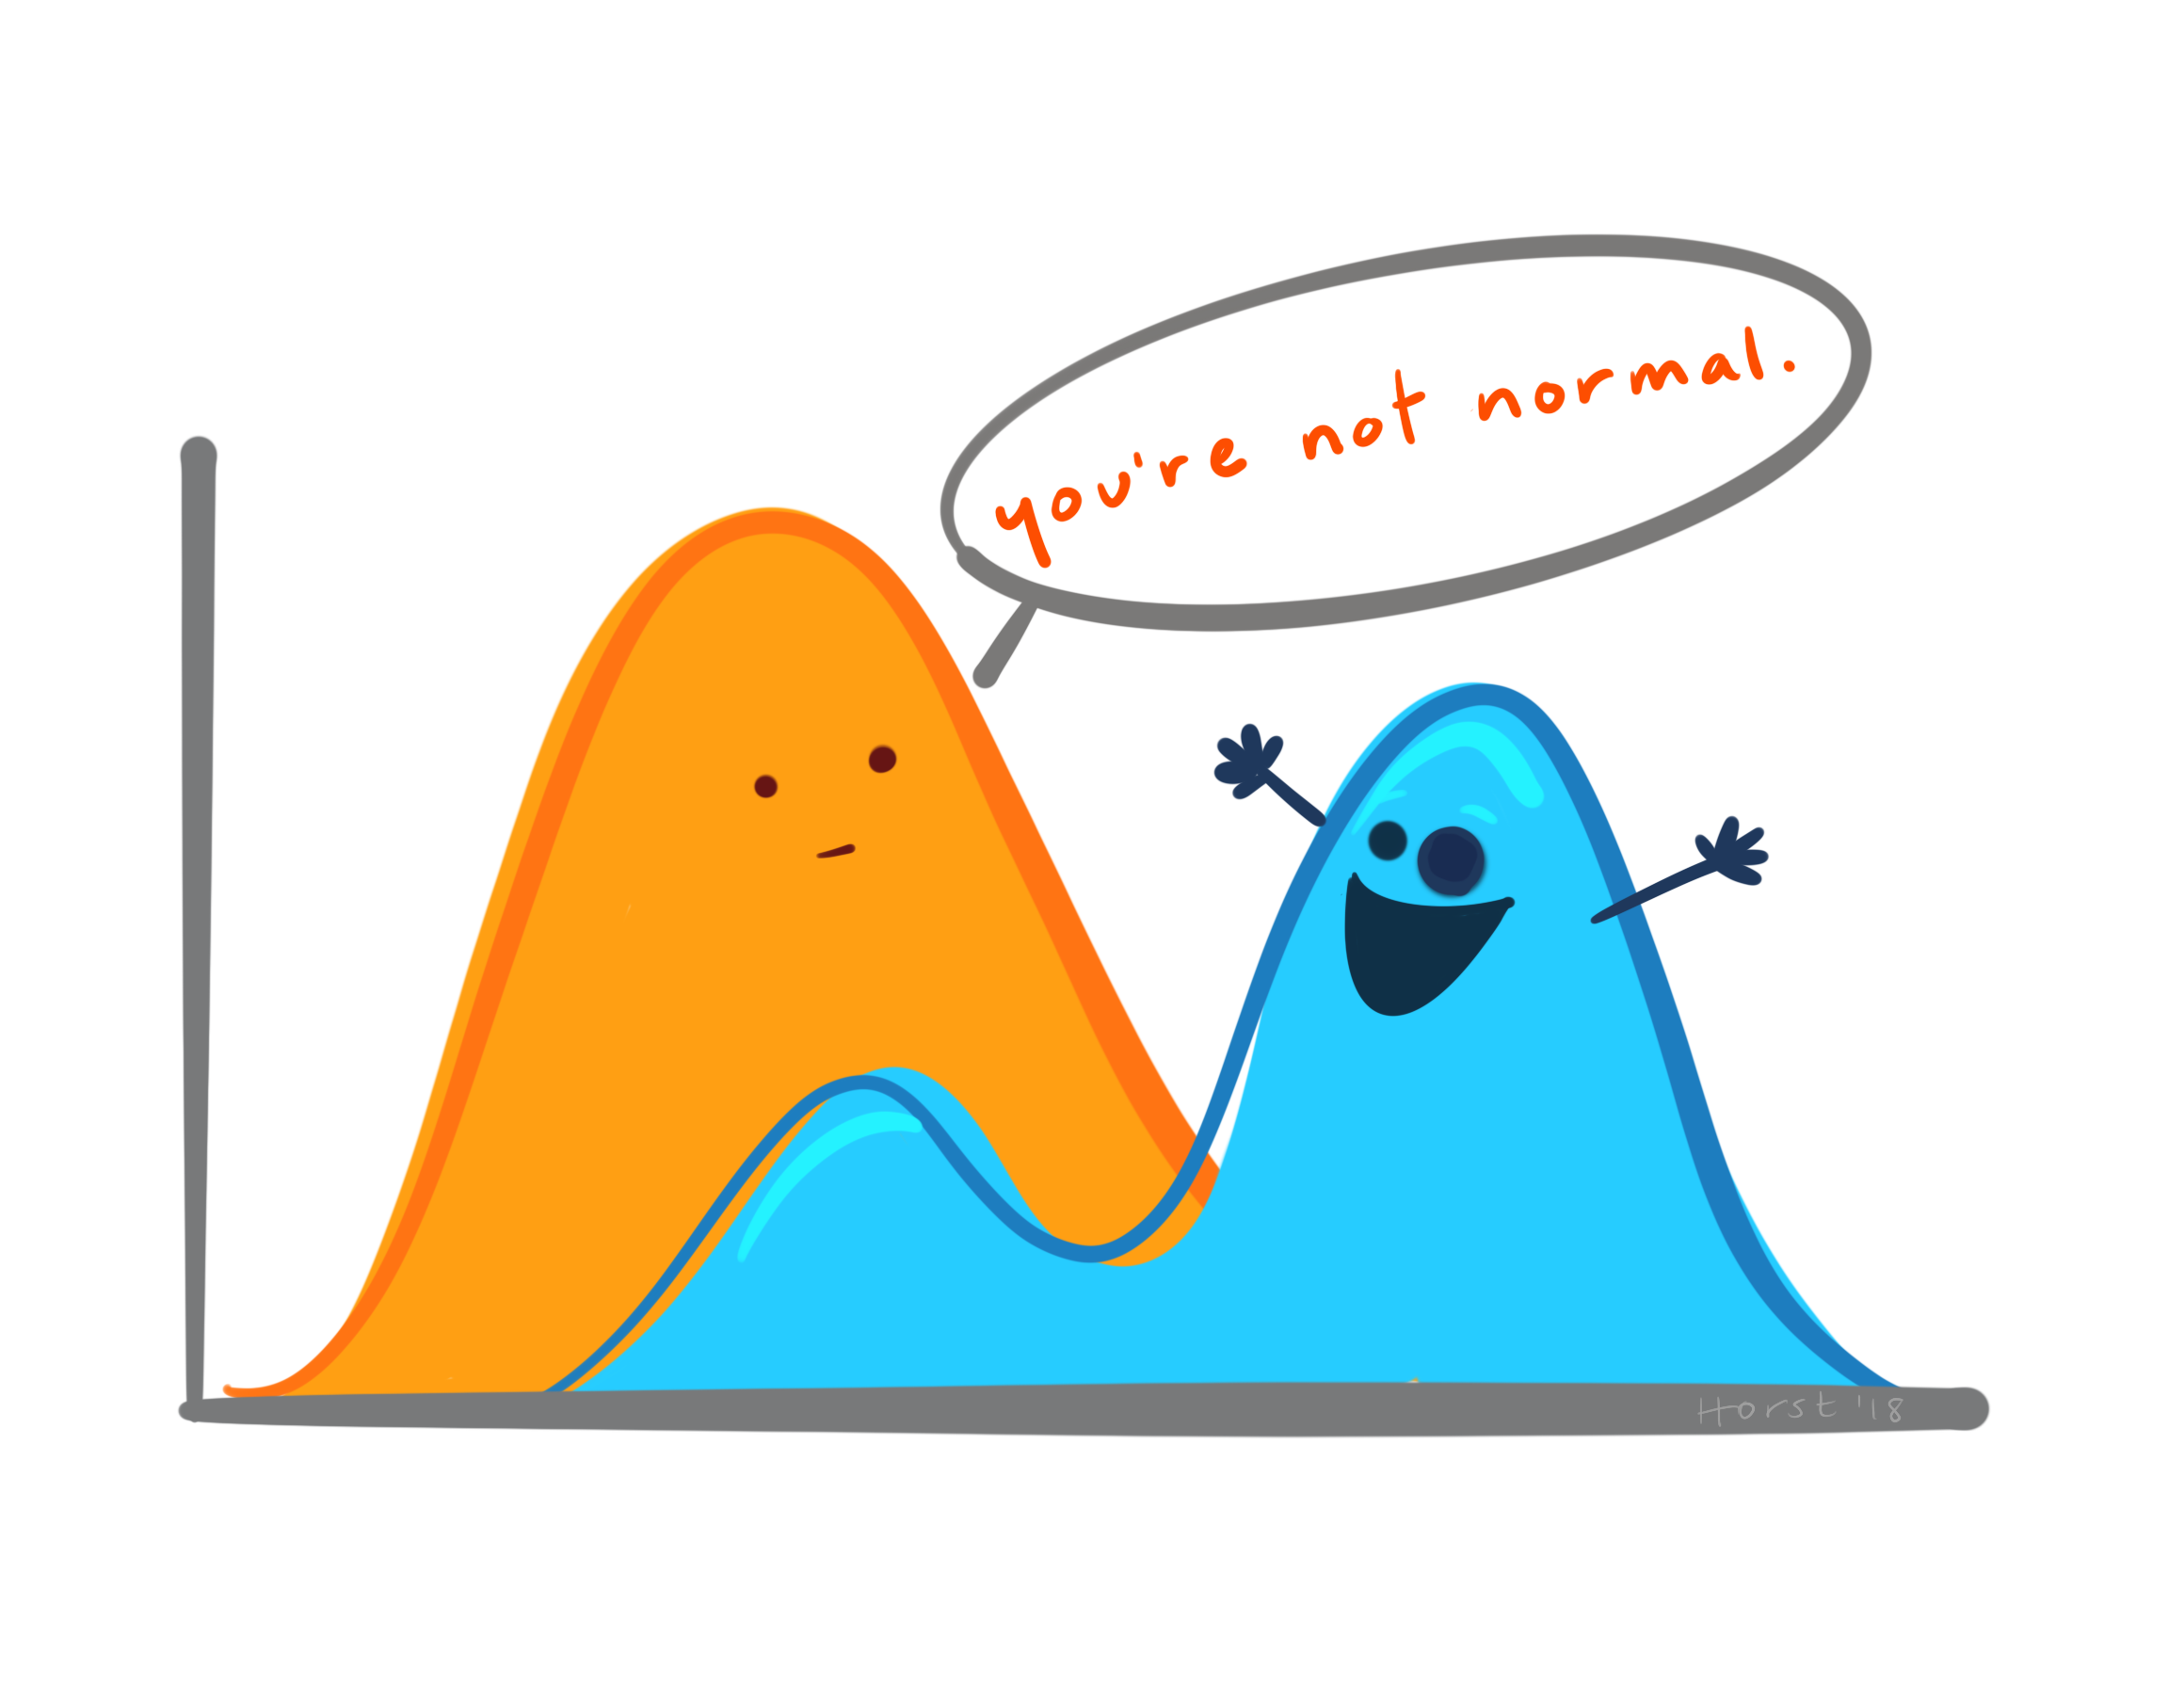 a cartoon of two distributions, one is normal (bell shaped curve) and one is not (dimodal, two peaks, with the one on the right being higher